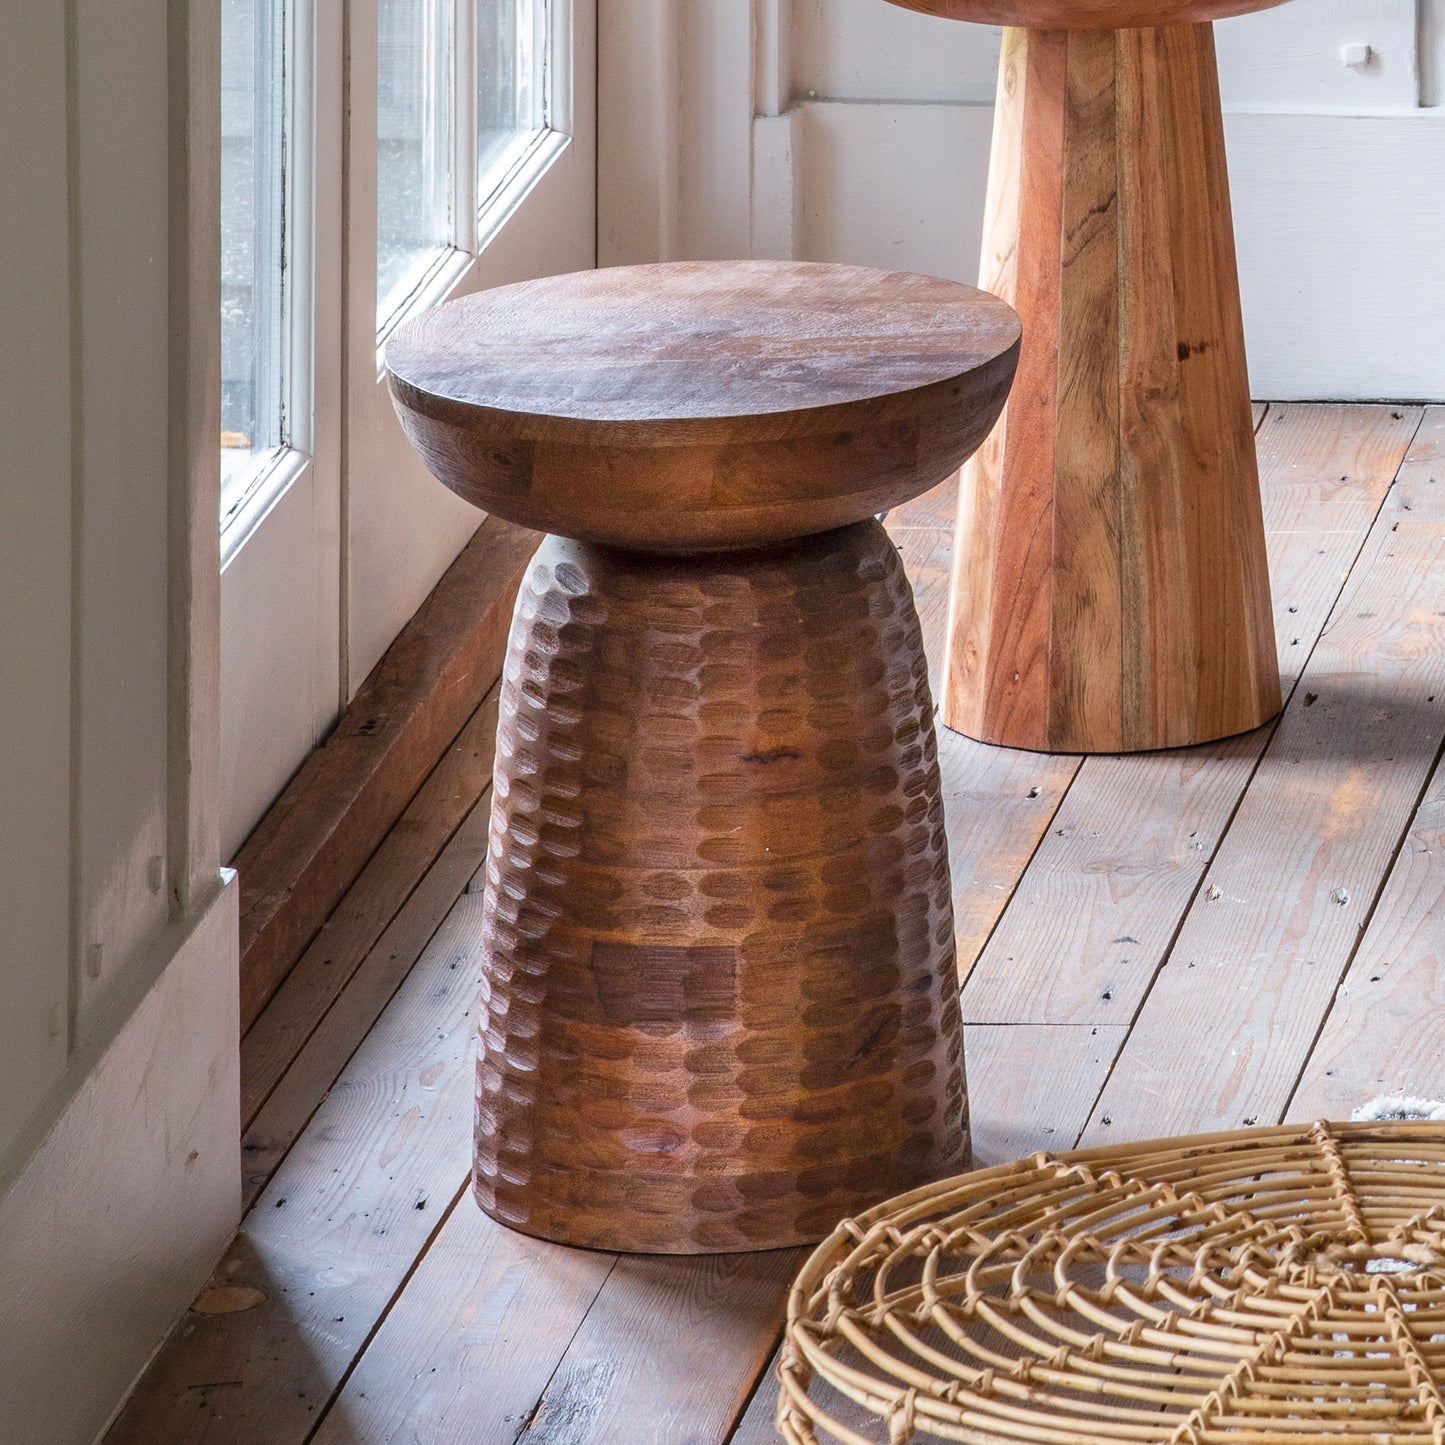 A Kennington Side Table by Kikiathome.co.uk adding interior decor to a wooden floor.